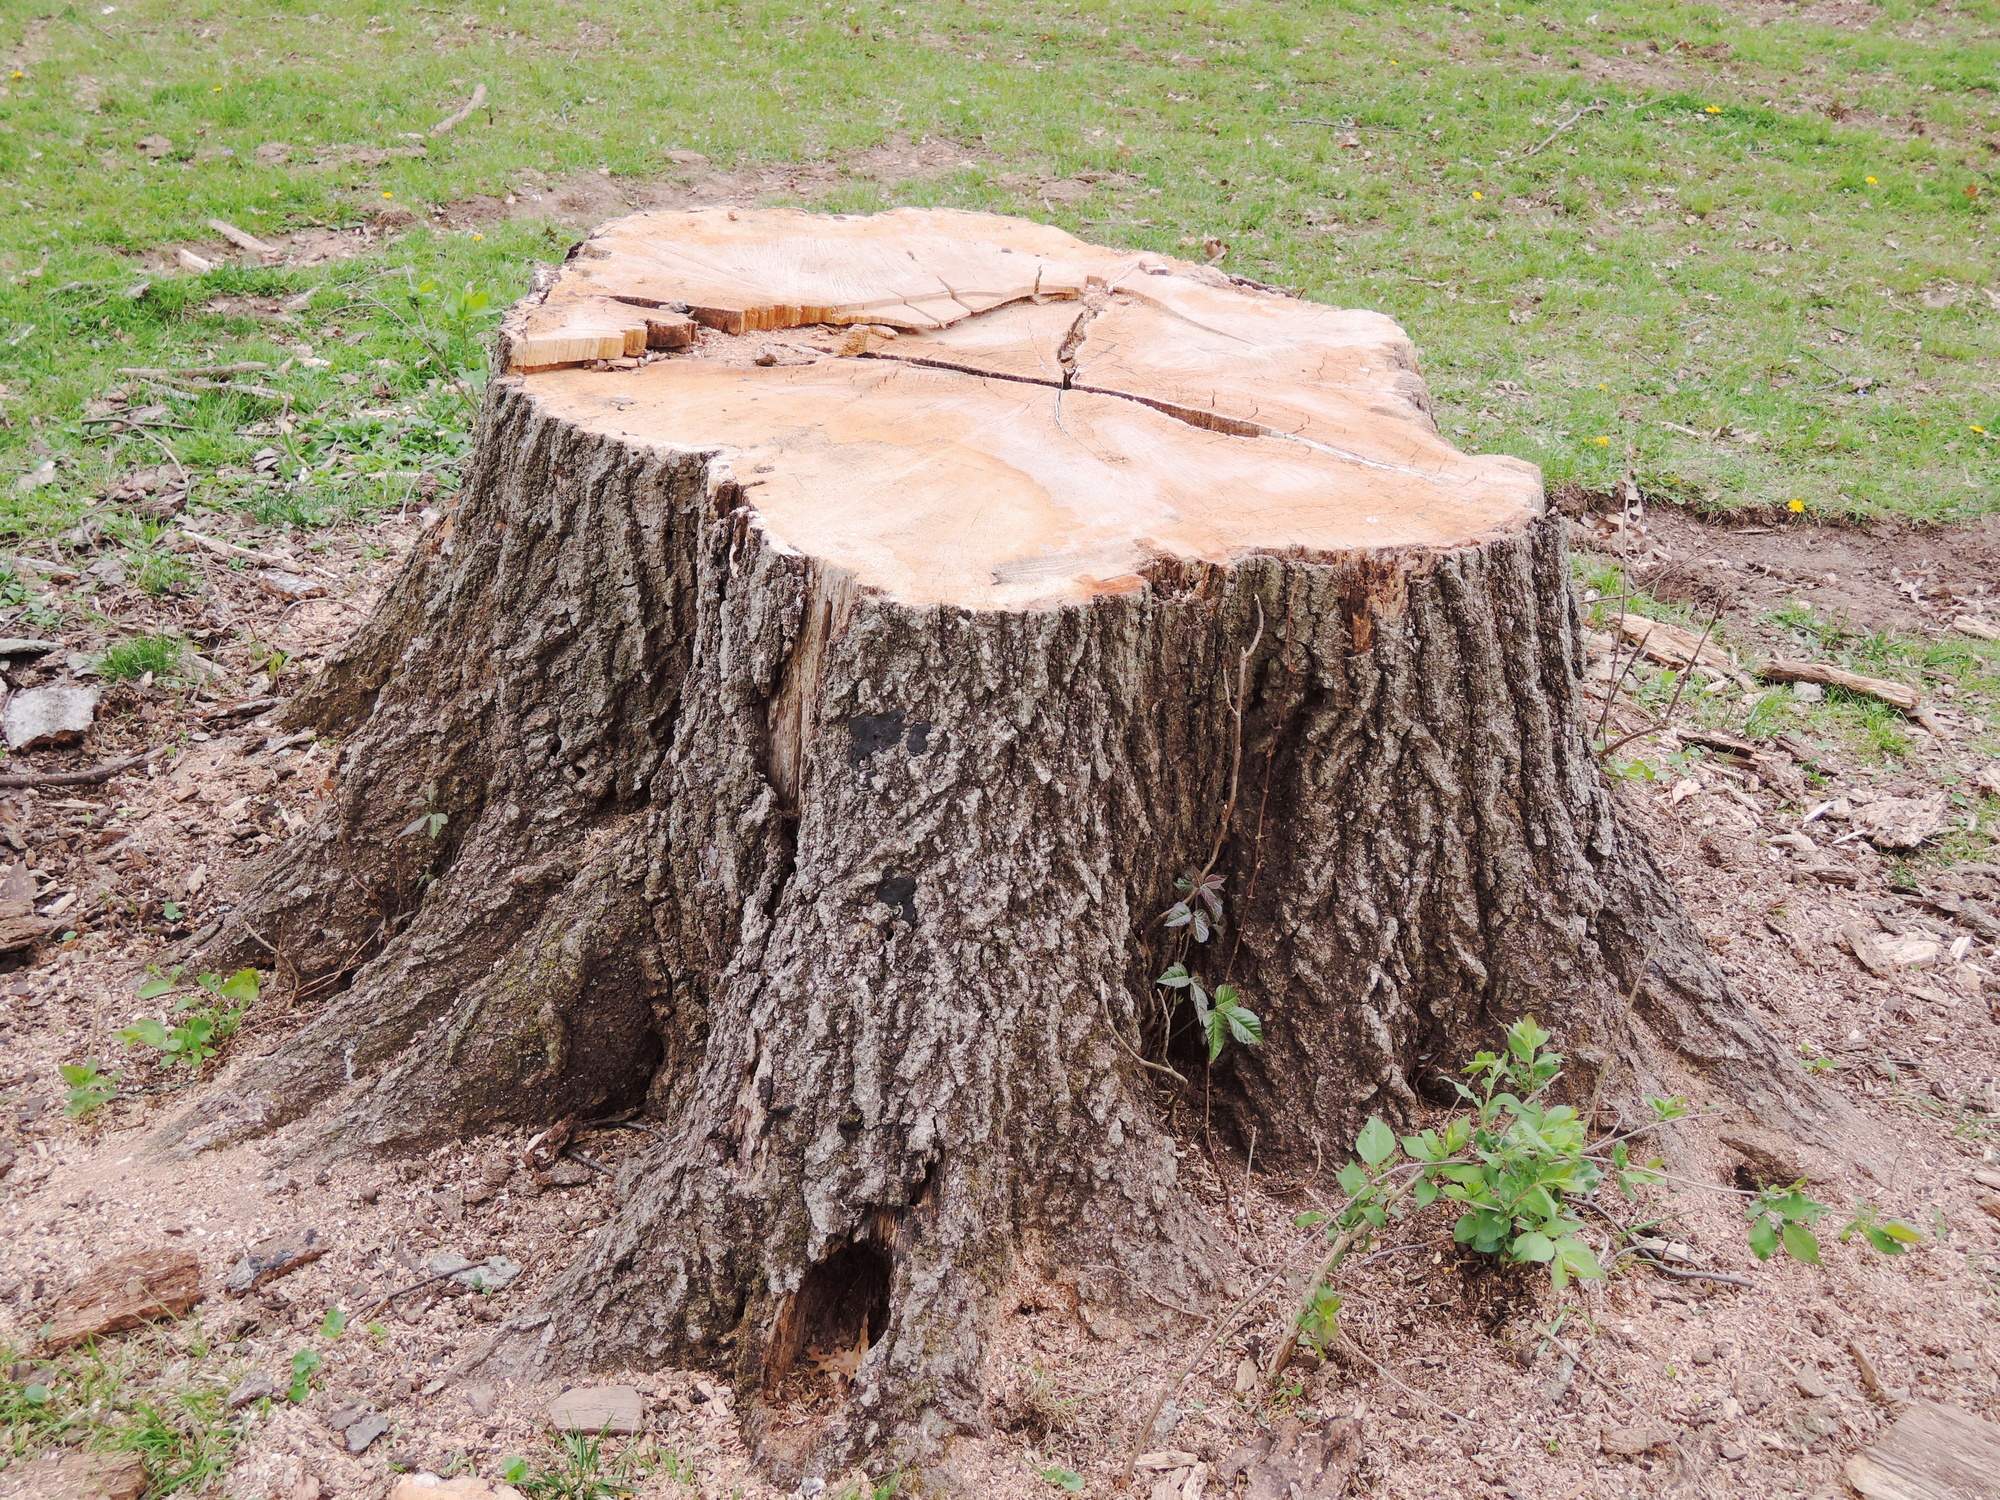 Don’t Get Stumped: Benefits of Using a Fecon STUMPEX for Stump Grinding